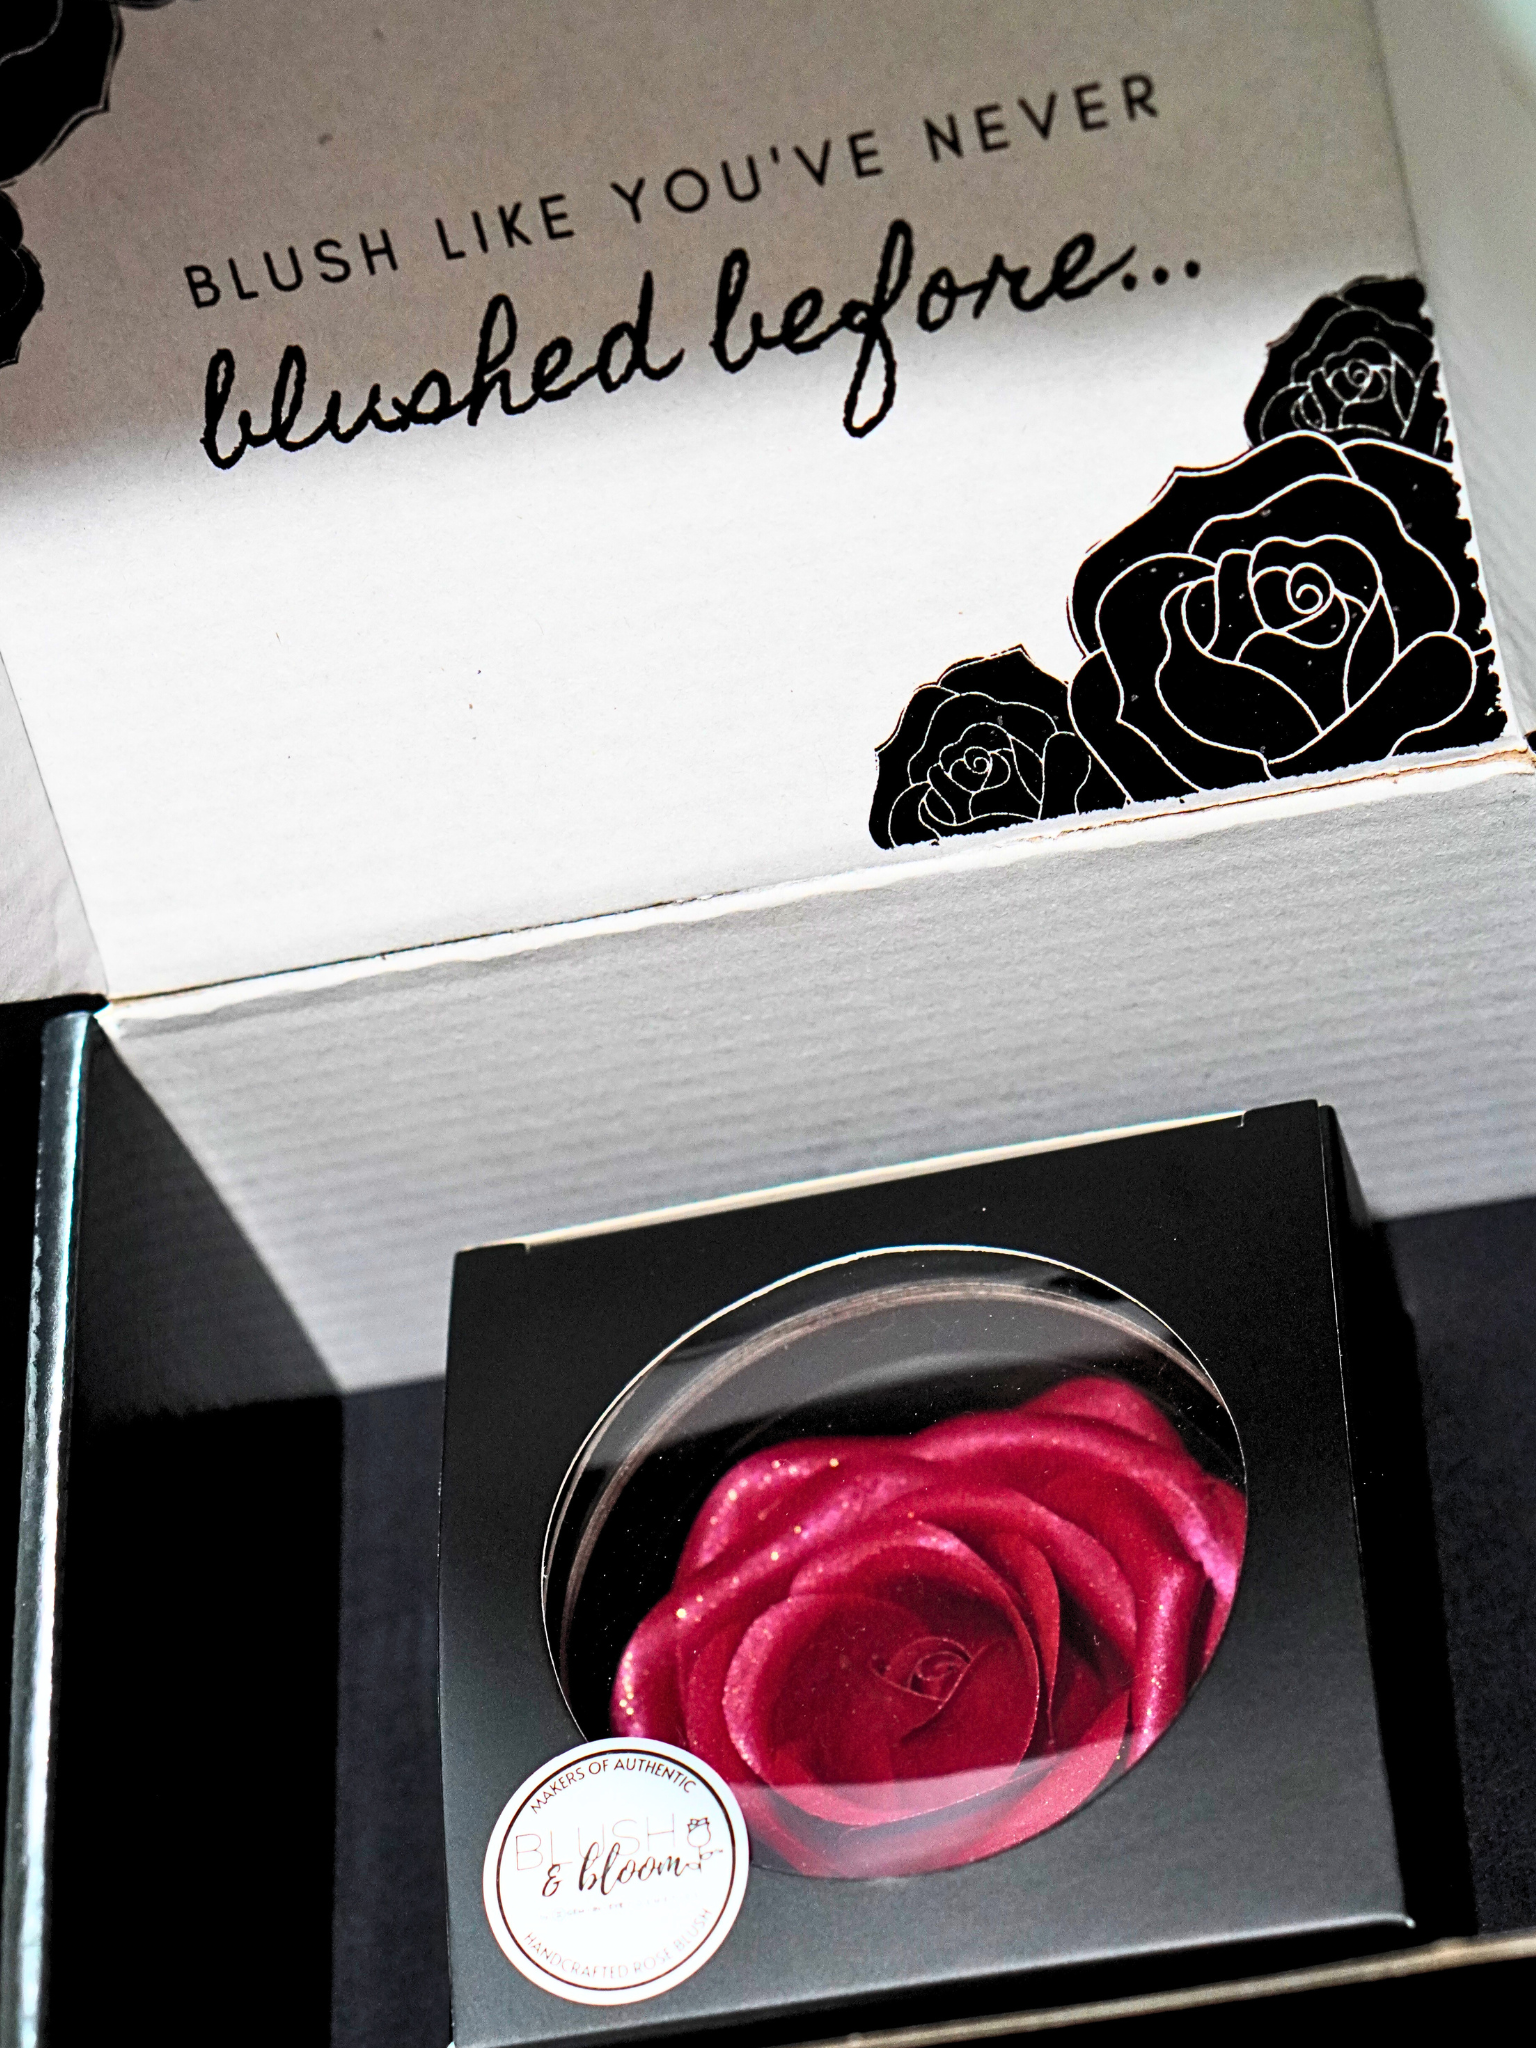 Blush&amp;Bloom™ is an Authentic Scented Rose Blush product designed by GEM IN EYE Cosmetics. This shade is Feisty in Rose Red color. It is highly pigmented and buildable great for all skin tones and best used for medium to dark skin tones. It is a creamy powder with a matte-to-shimmer finish. It will give you that “Blushing Bride Glow”. These rose blushes were first introduced in the beauty industry in NEW YORK FASHION WEEK September 2022 Edition